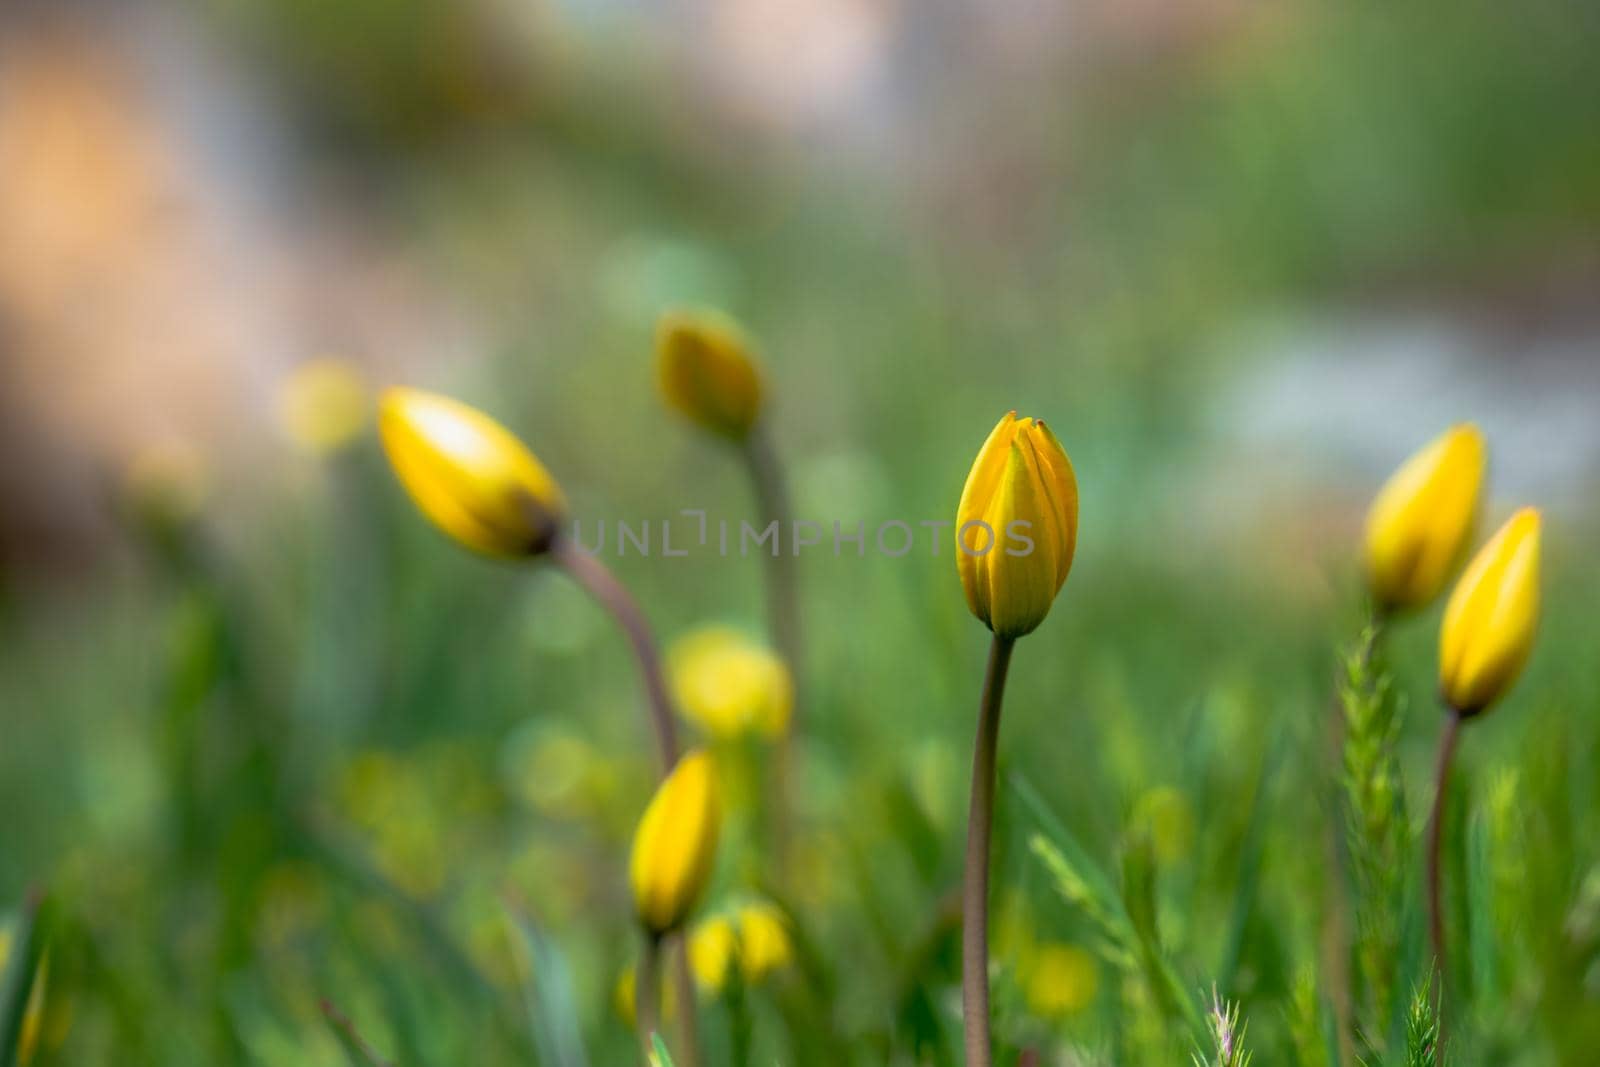 Grass flower in soft focus and blurred with vintage style for background by igor010